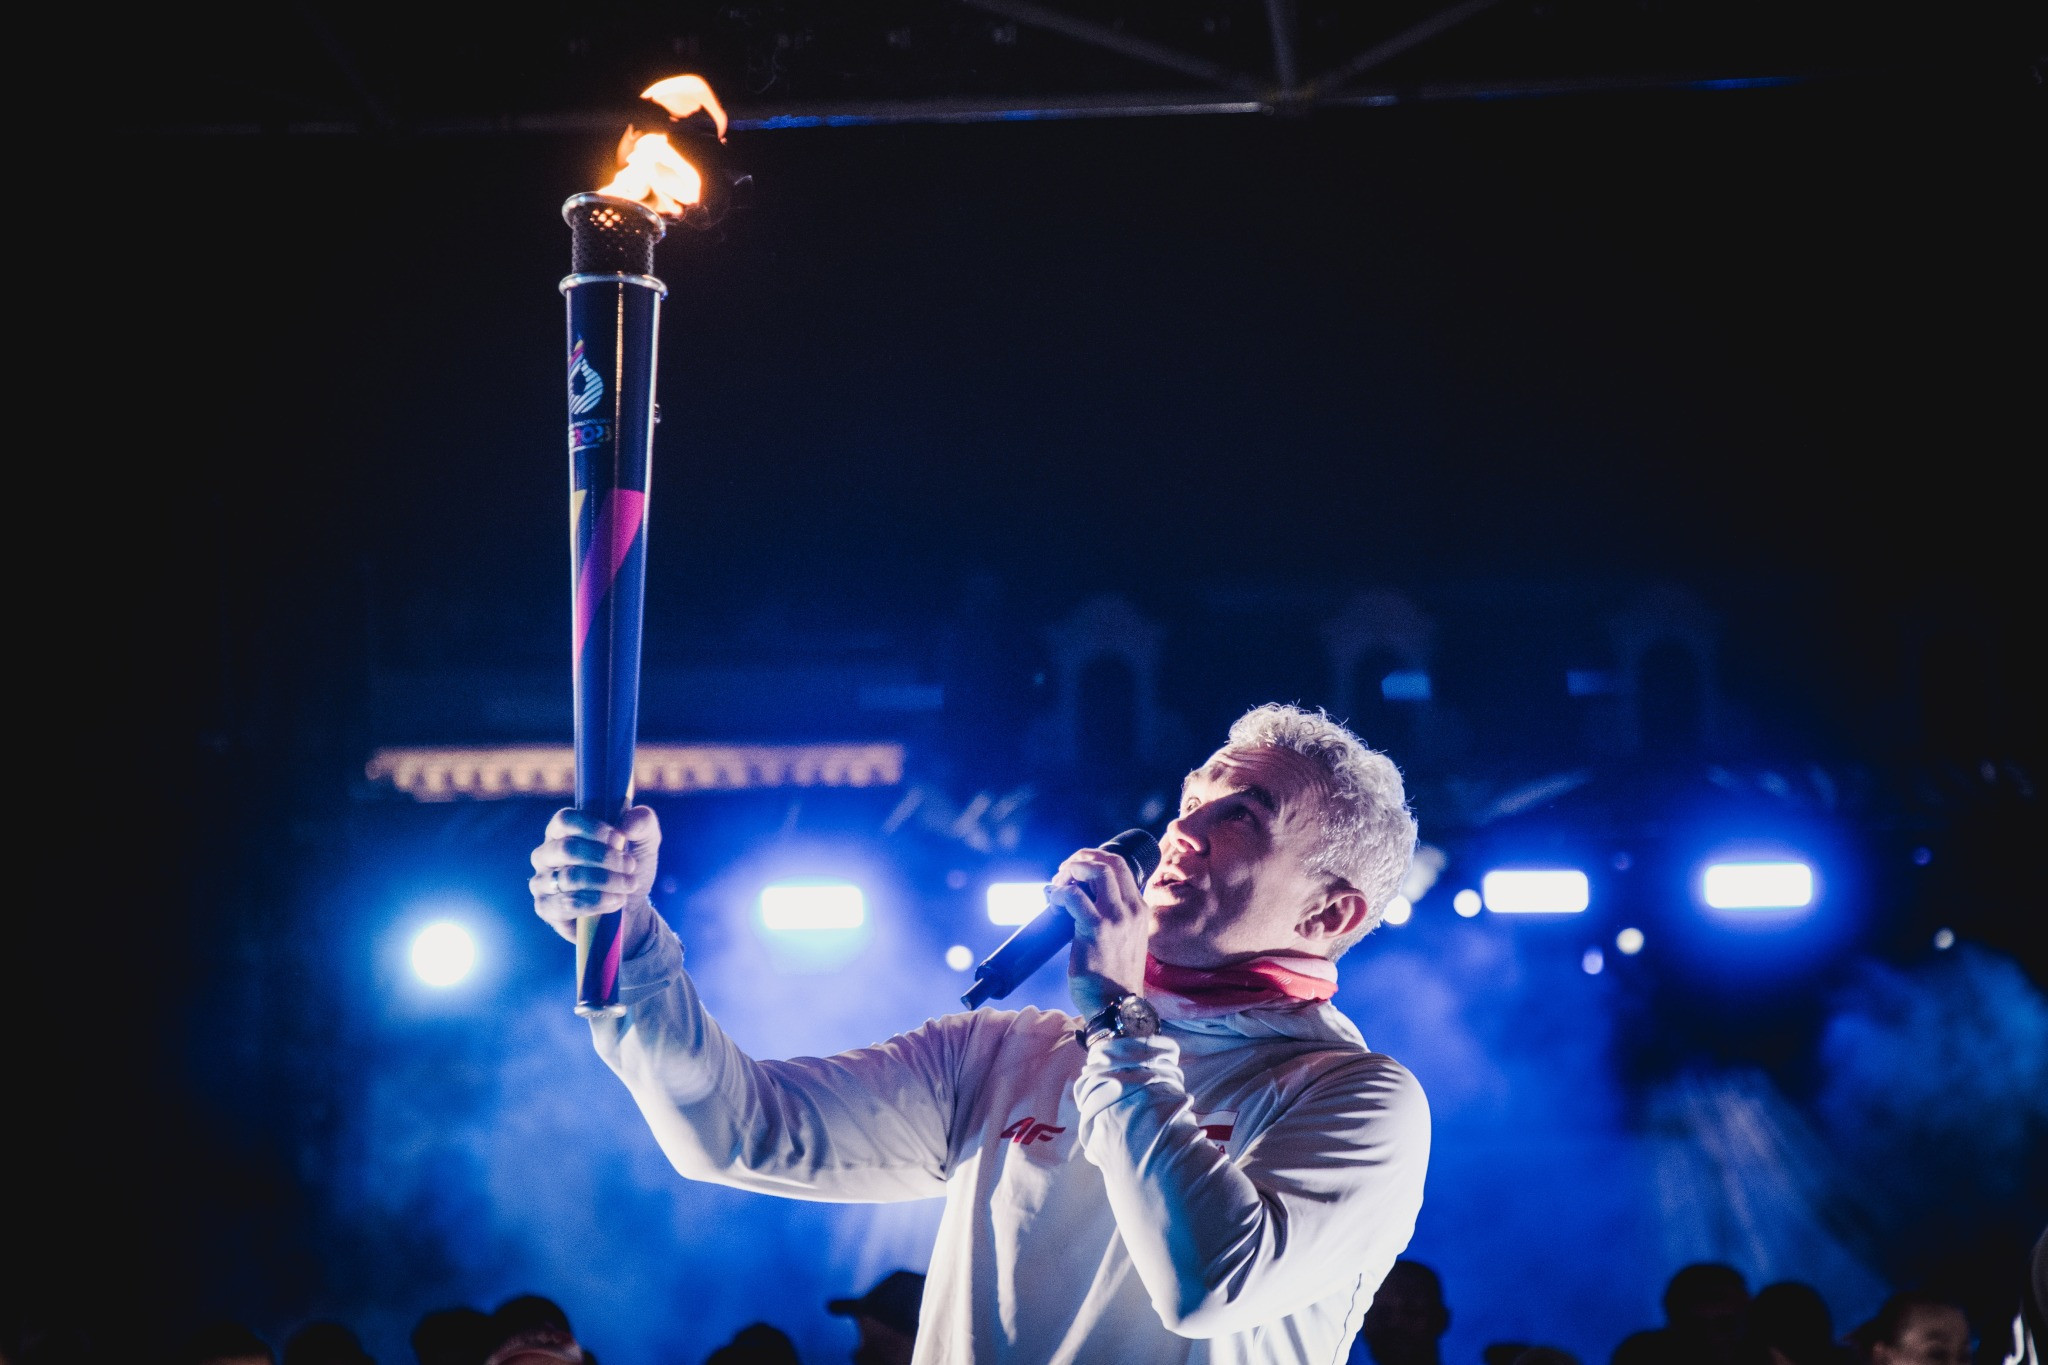 The European Games 2023 Flame of Peace has been presented in Kraków for the first time ©EOC